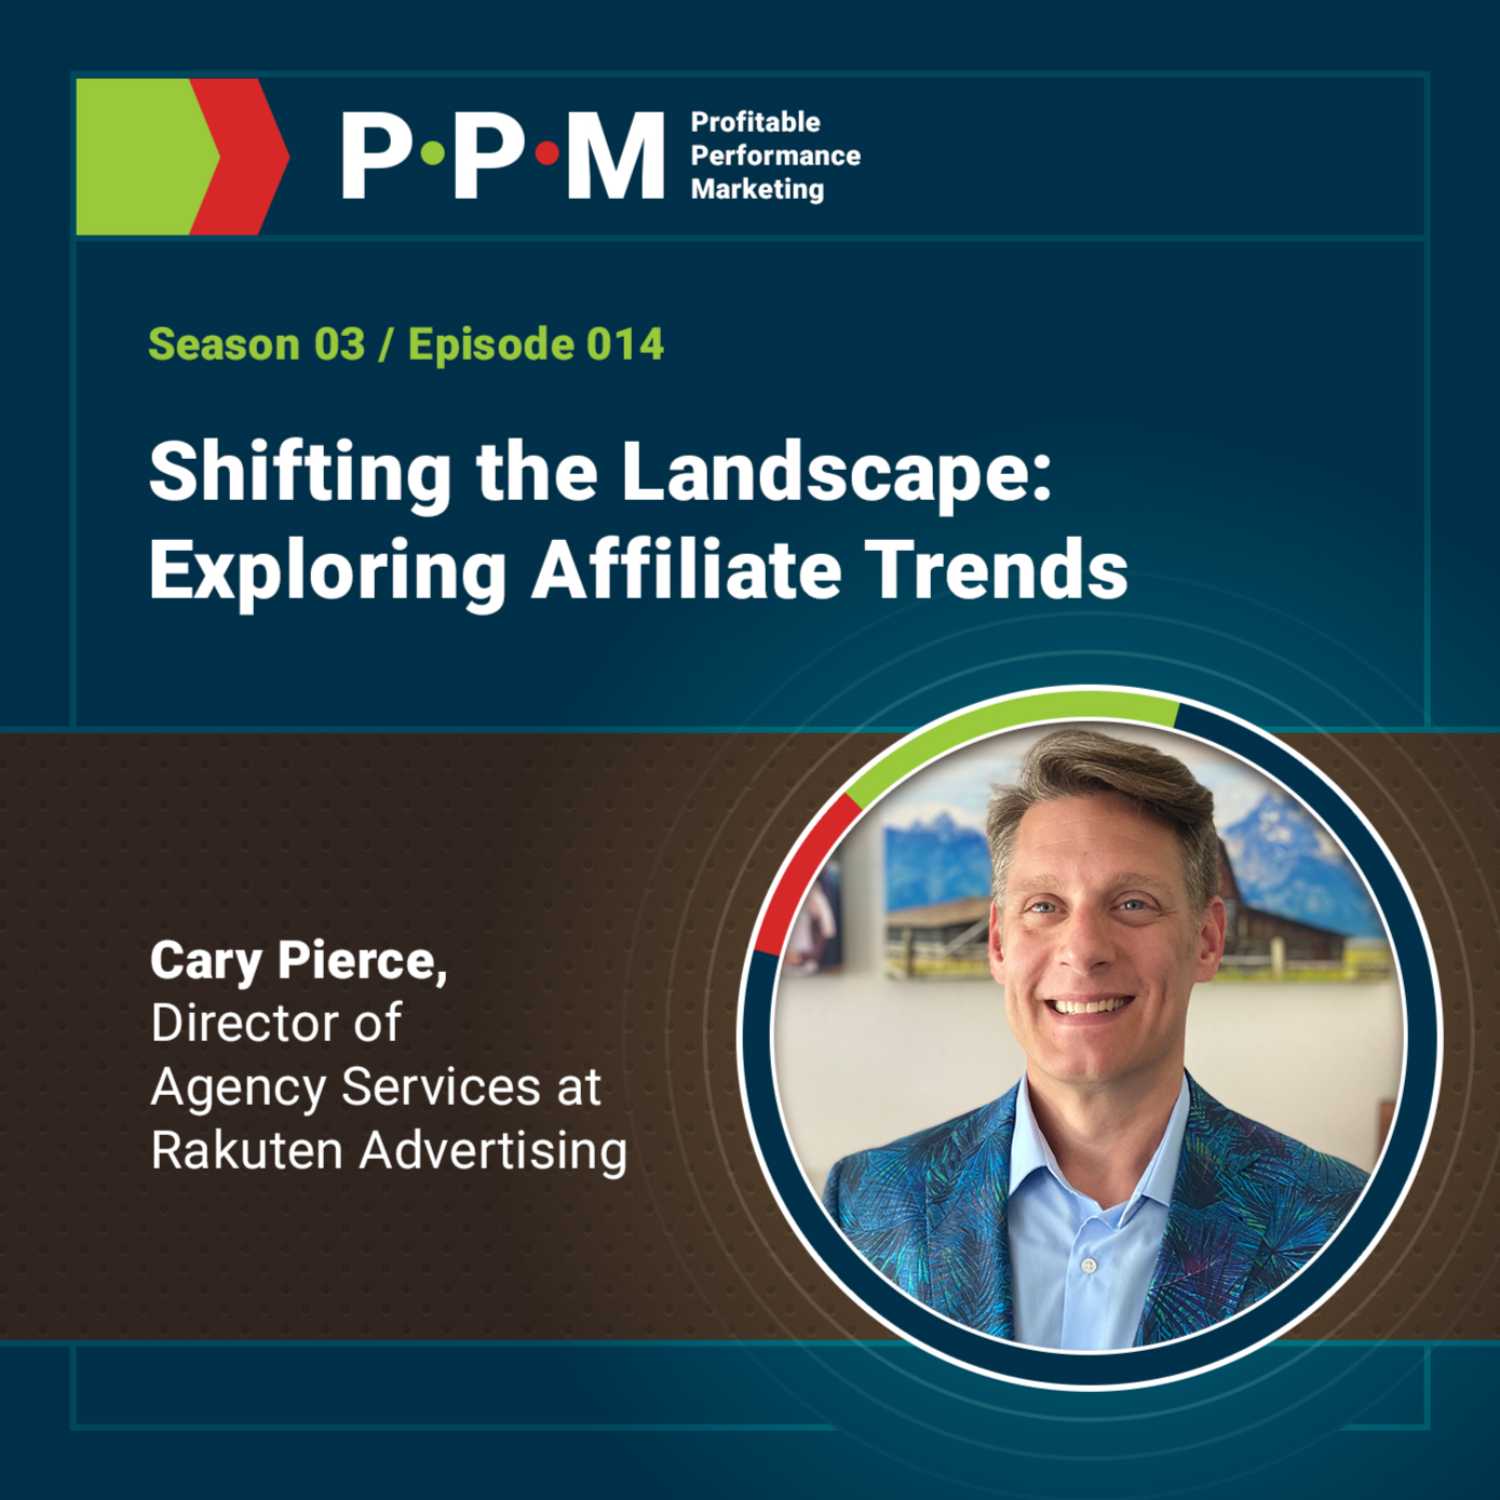 Shifting the Landscape: Exploring Affiliate Trends with Cary Pierce